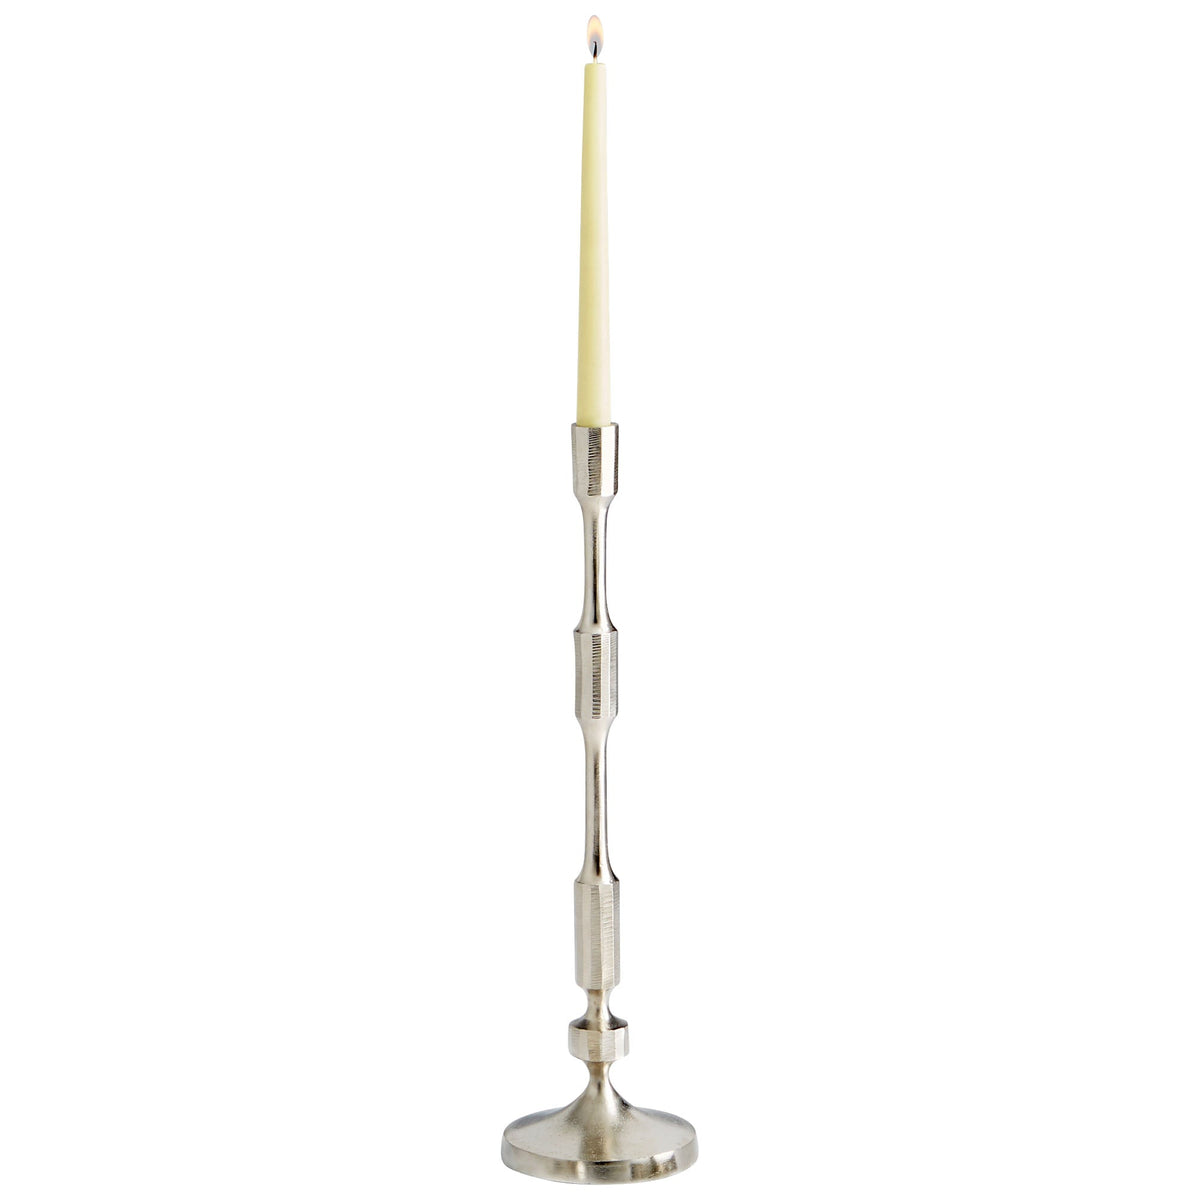 Cambria Candleholder -LG by Cyan